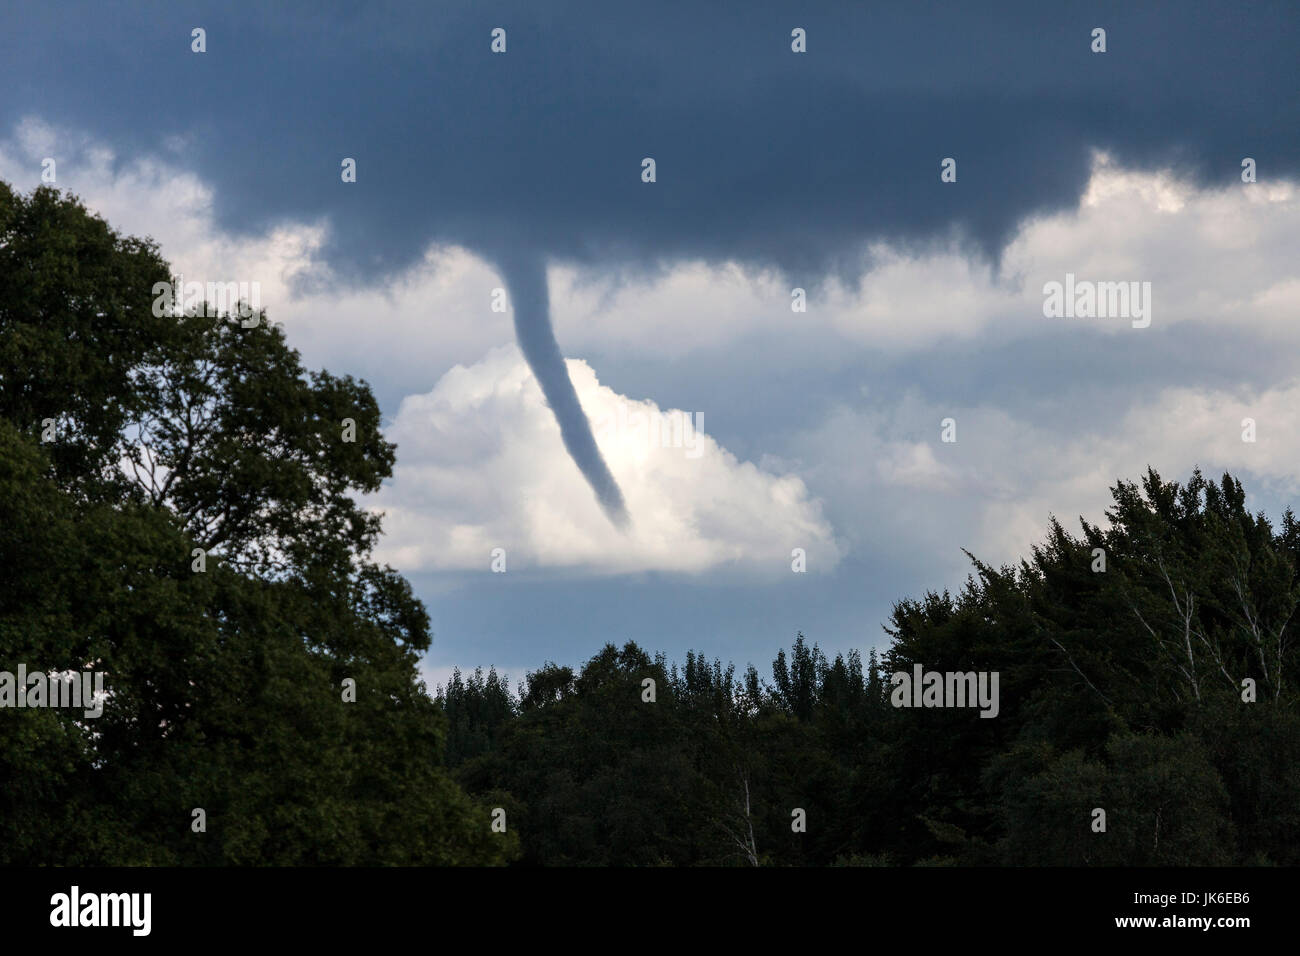 Bowlees, Upper Teesdale, County Durham UK.  Saturday 22nd July 2017. UK Weather.  This Funnel Cloud which can form into a Tornado was spotted near Bowlees in Upper Teesdale this afternoon as thunderstorms and torrential rain swept through some parts of County Durham. This tornado formed only minutes after four people were rescued from a nearby island in the River Tees after being cut off by a flash flood.  Credit: David Forster/Alamy Live News. Stock Photo